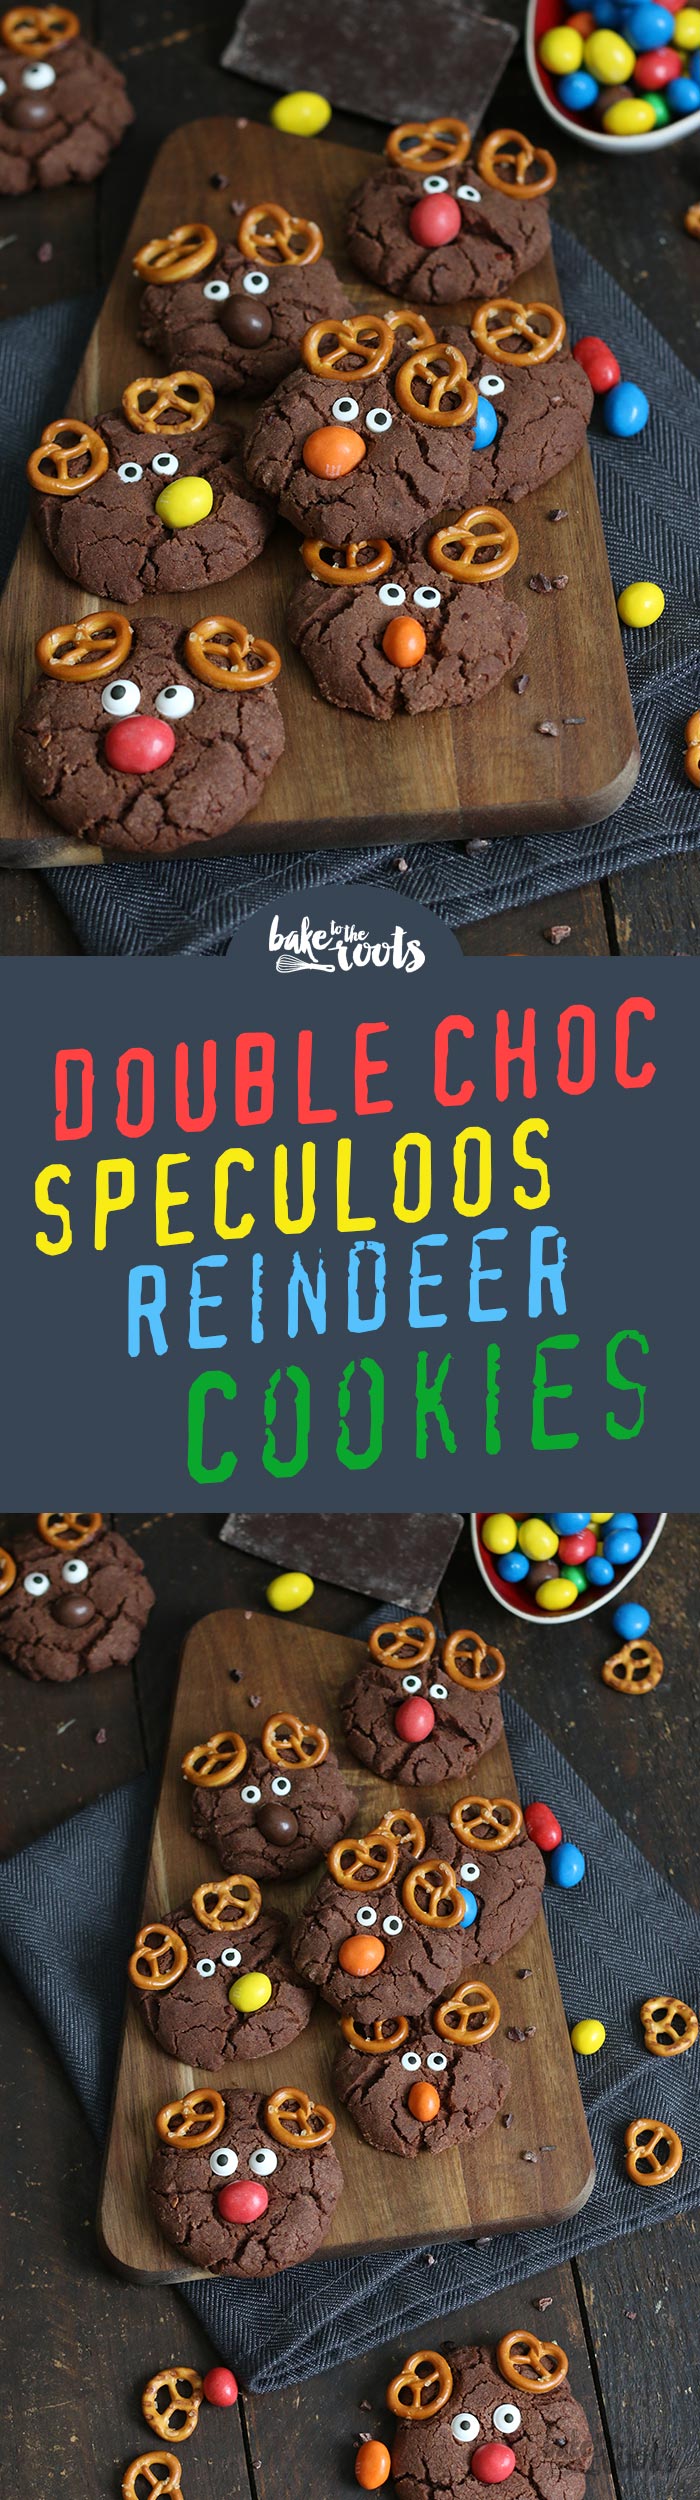 Delcicious Double Chocolate Cookies with Speculoos Spice | Bake to the roots